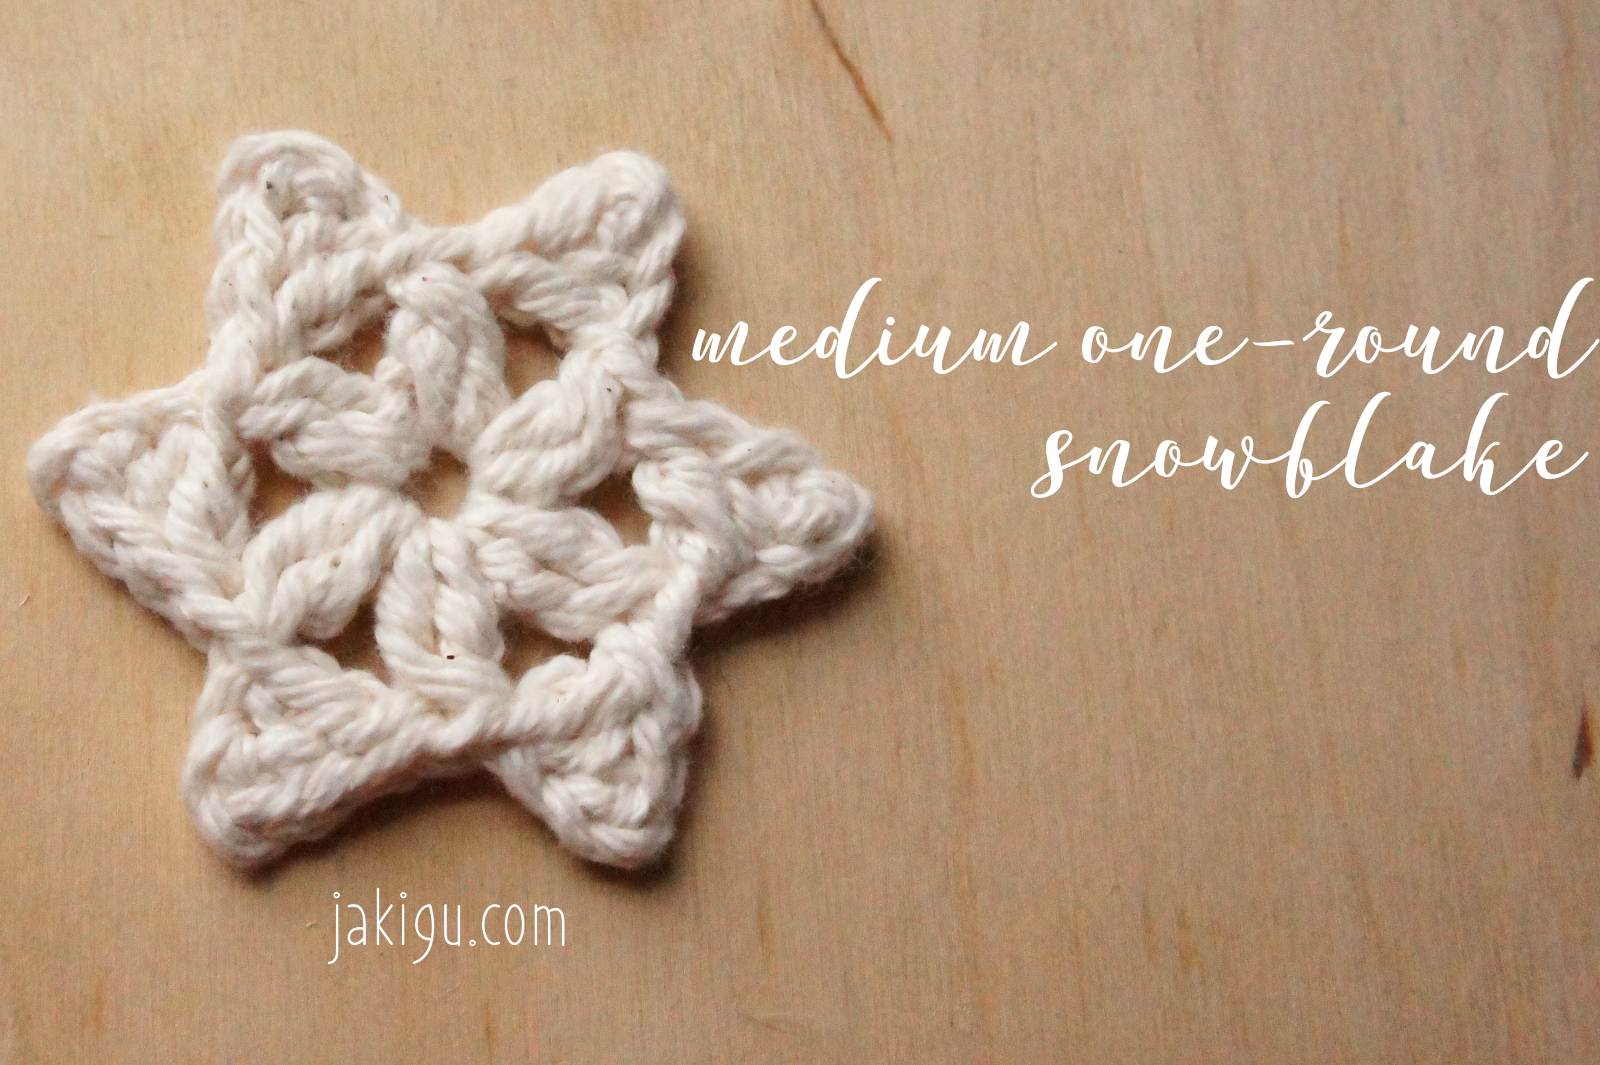 Quick and Easy Christmas Project - Free Snowflake Crochet Pattern by JaKiGu